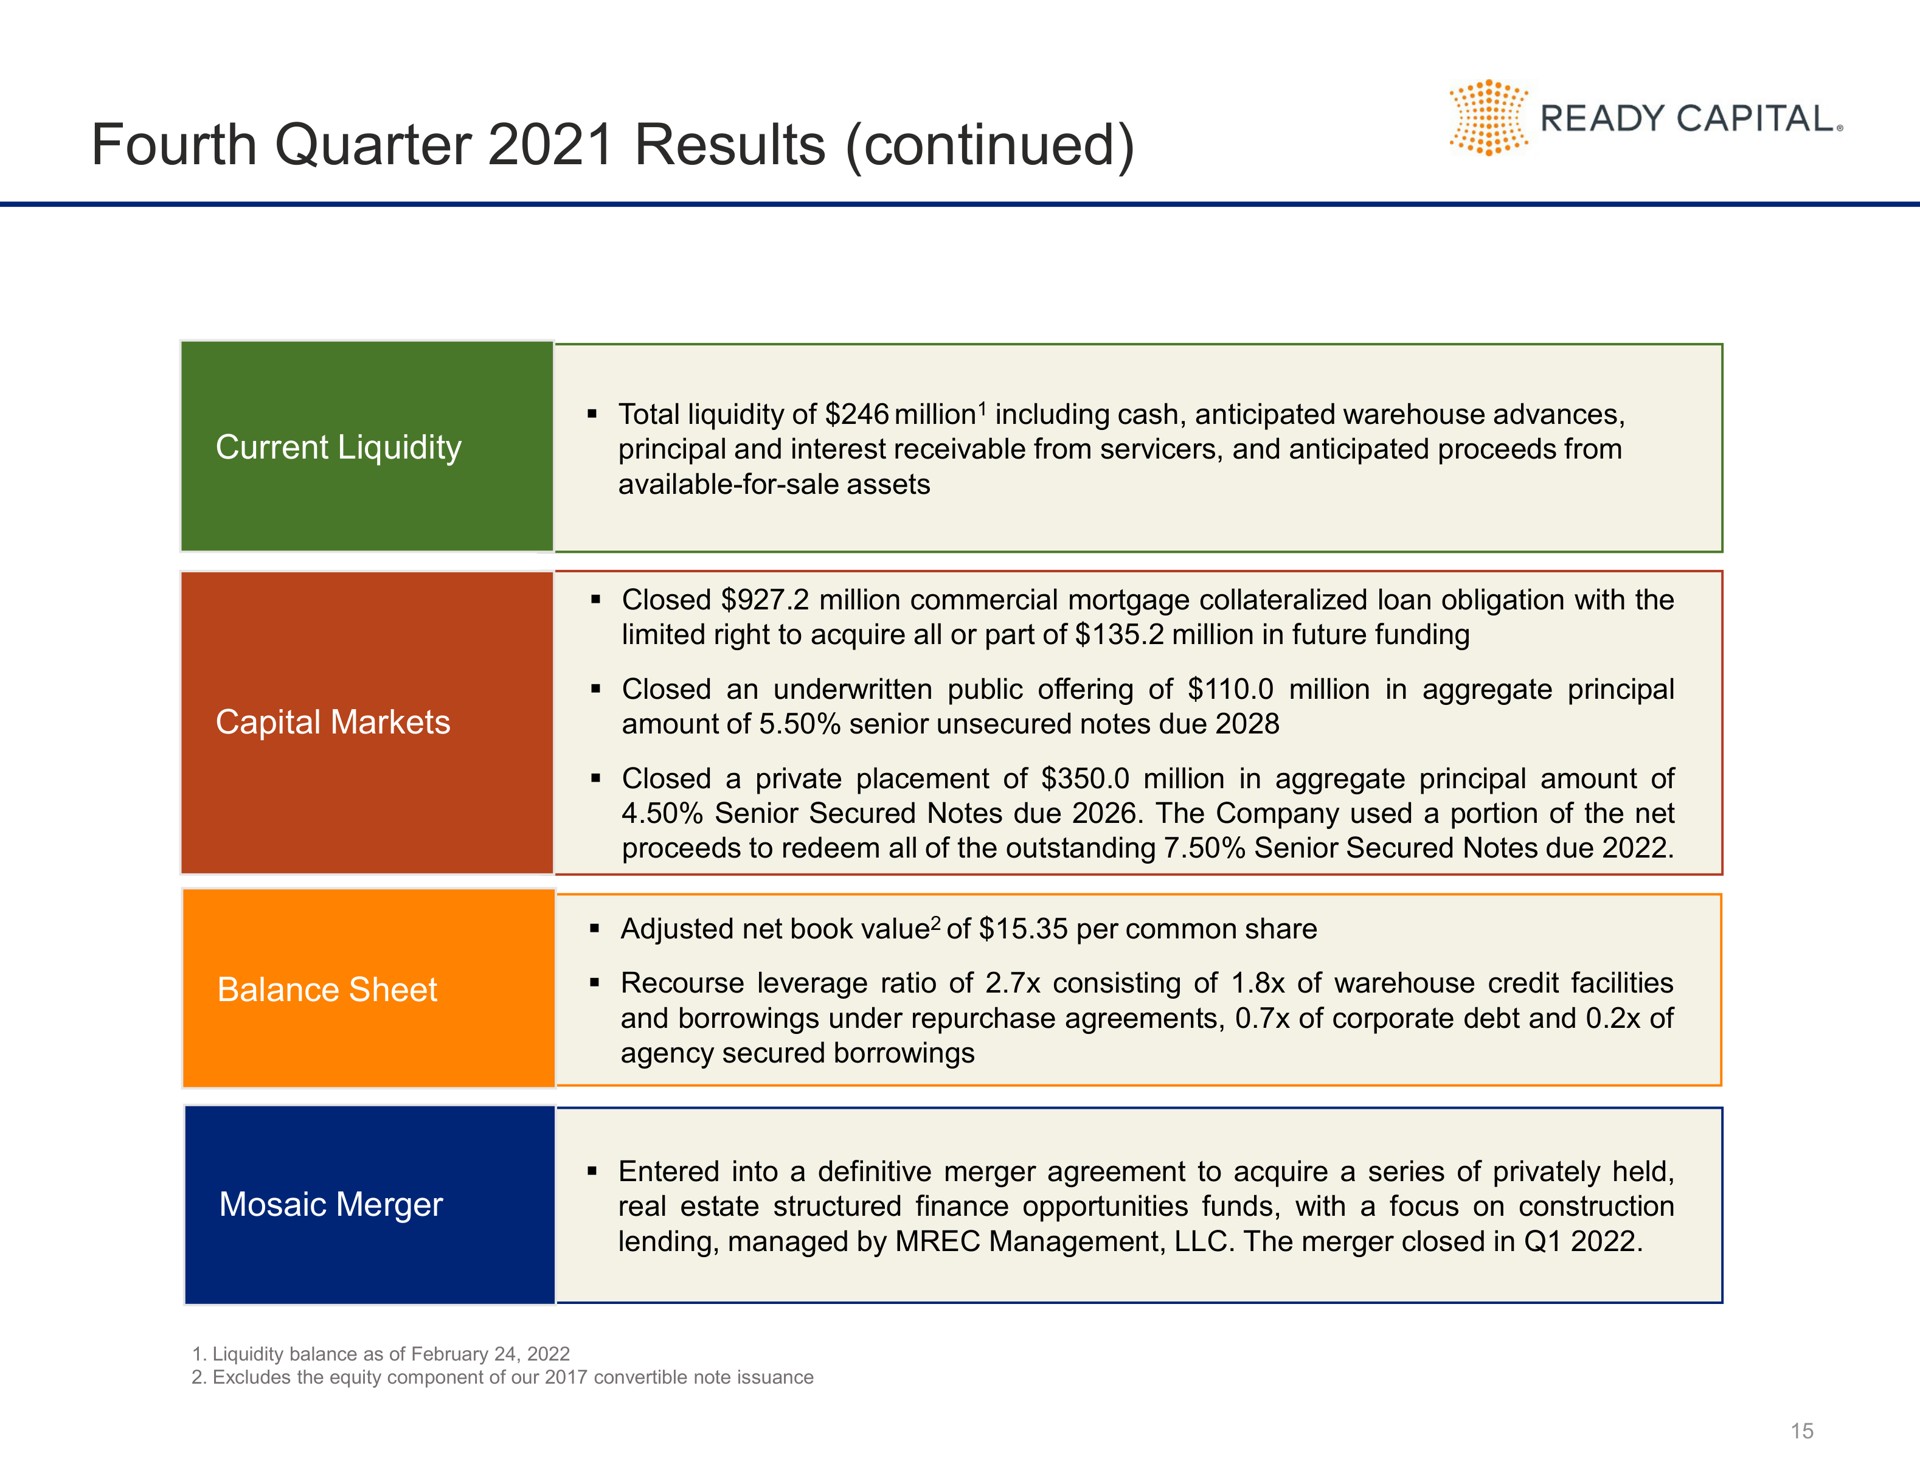 fourth quarter results continued heed | Ready Capital